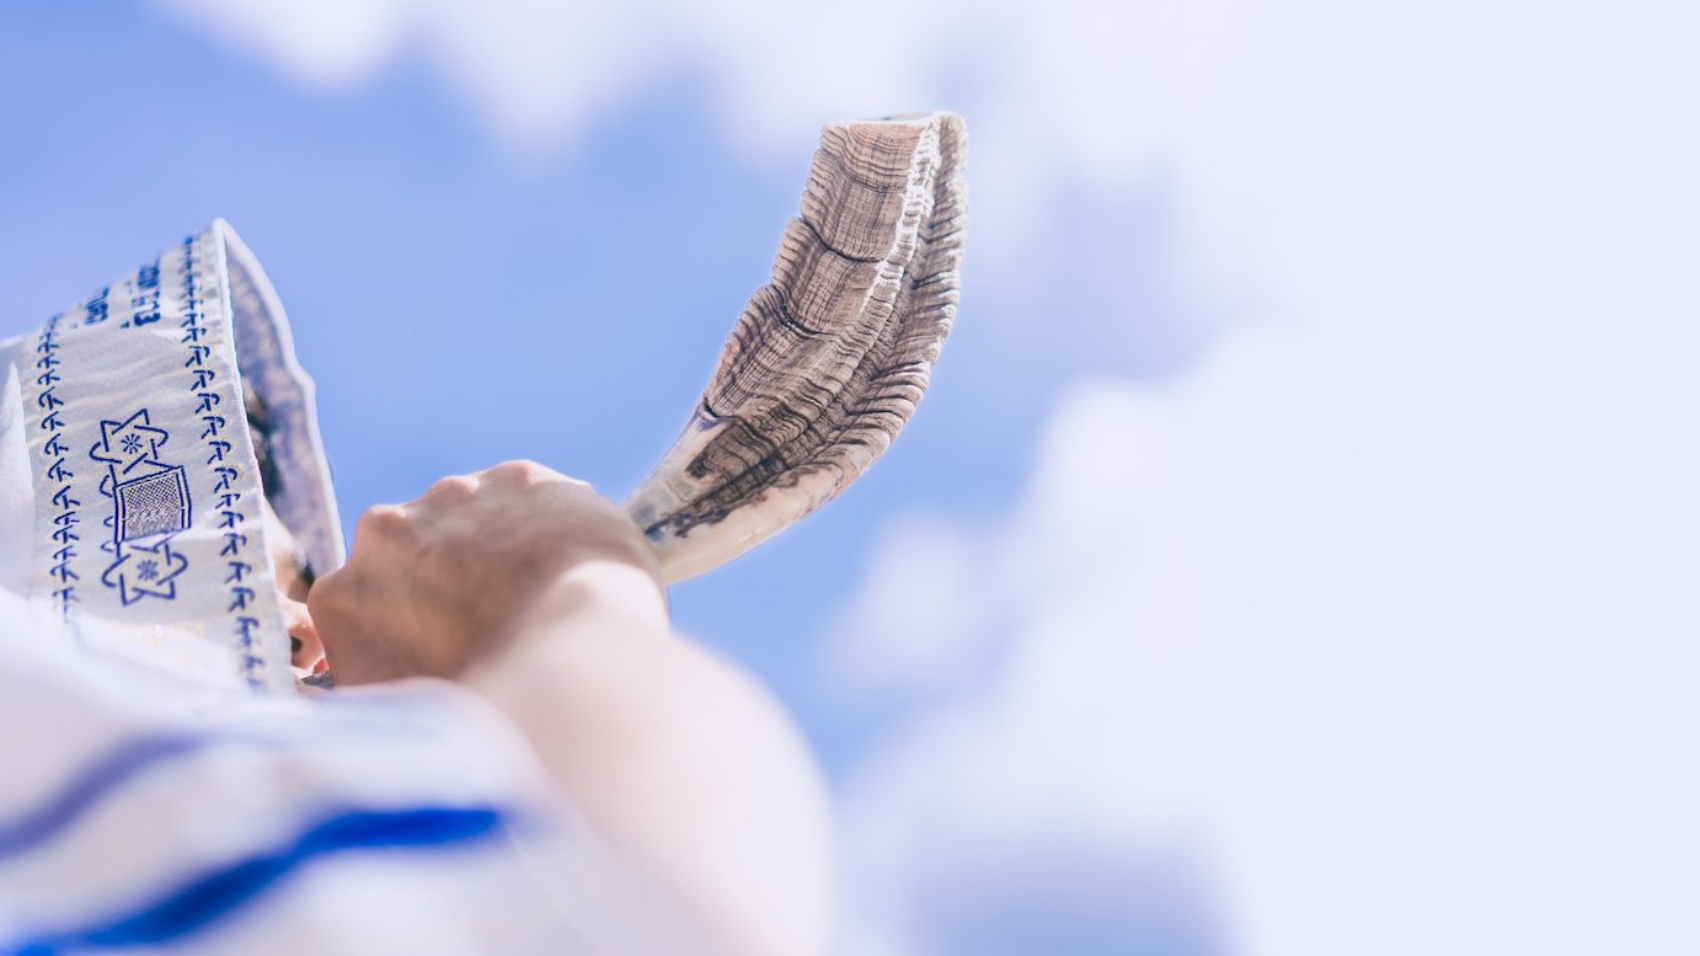 Happy Yom Kippur.Happy new year.Jewish man in Tallit blowing the Shofar (horn) of Rosh Hashanah (New Year Jew).Religious and Holidays in israel people of GOD.Peace Pray Freedom in Israel.Banner.